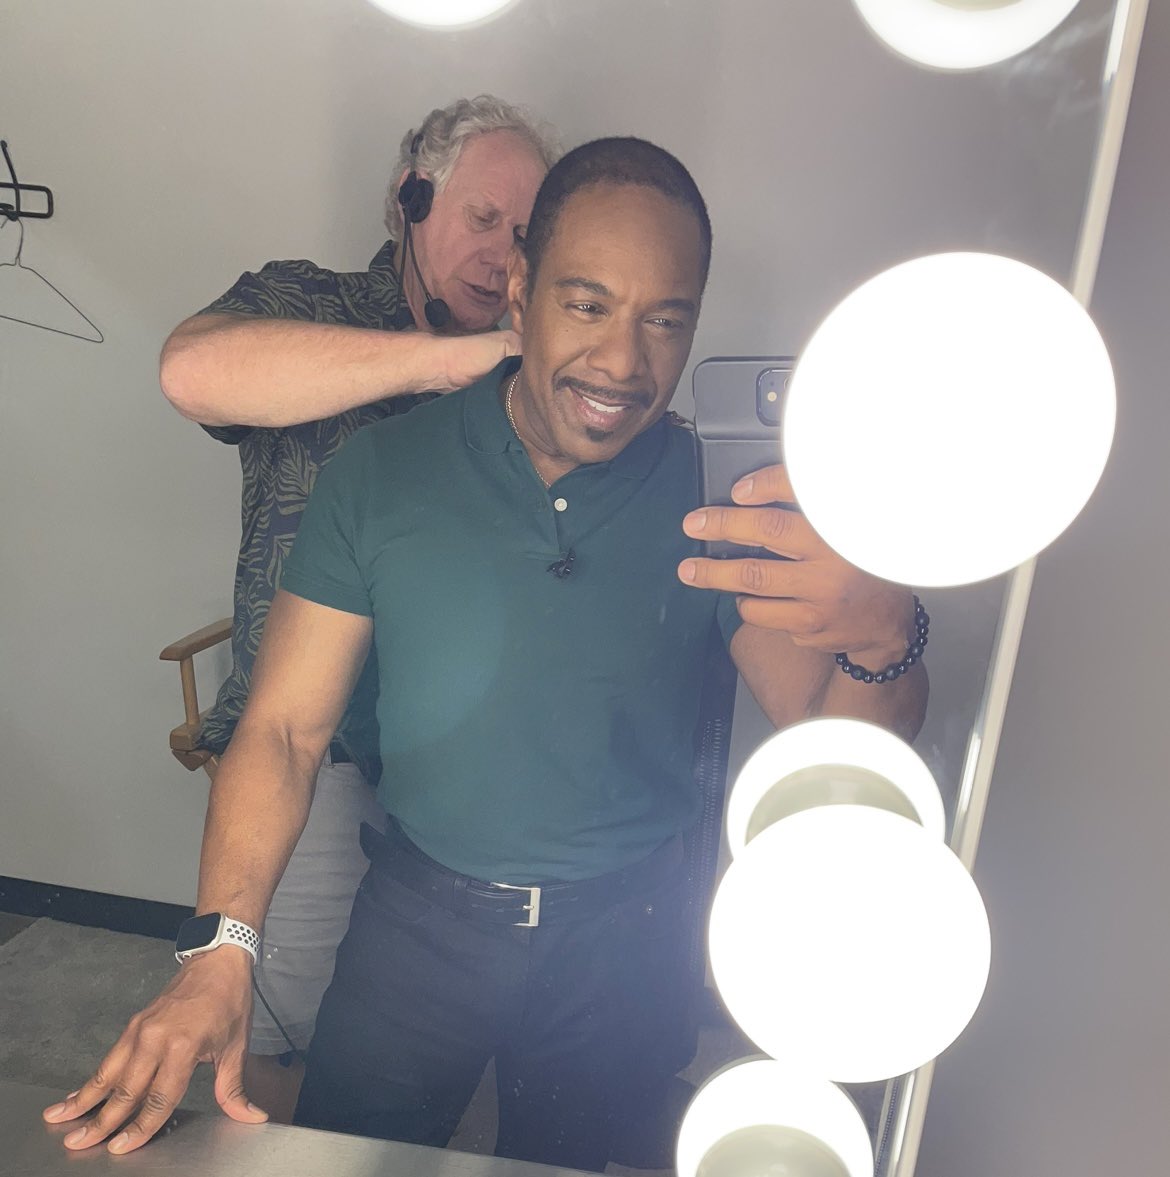 It’s takes a team to prepare us for the show. I always say we have the hardest working family behind the scenes to make @OfficialOPLive the success that it is! Getting mic’d up for the show. @ReelzChannel @THEBIGDM1013 @1073jamz @abc_columbia #workingcrew #opl #onpatrollive